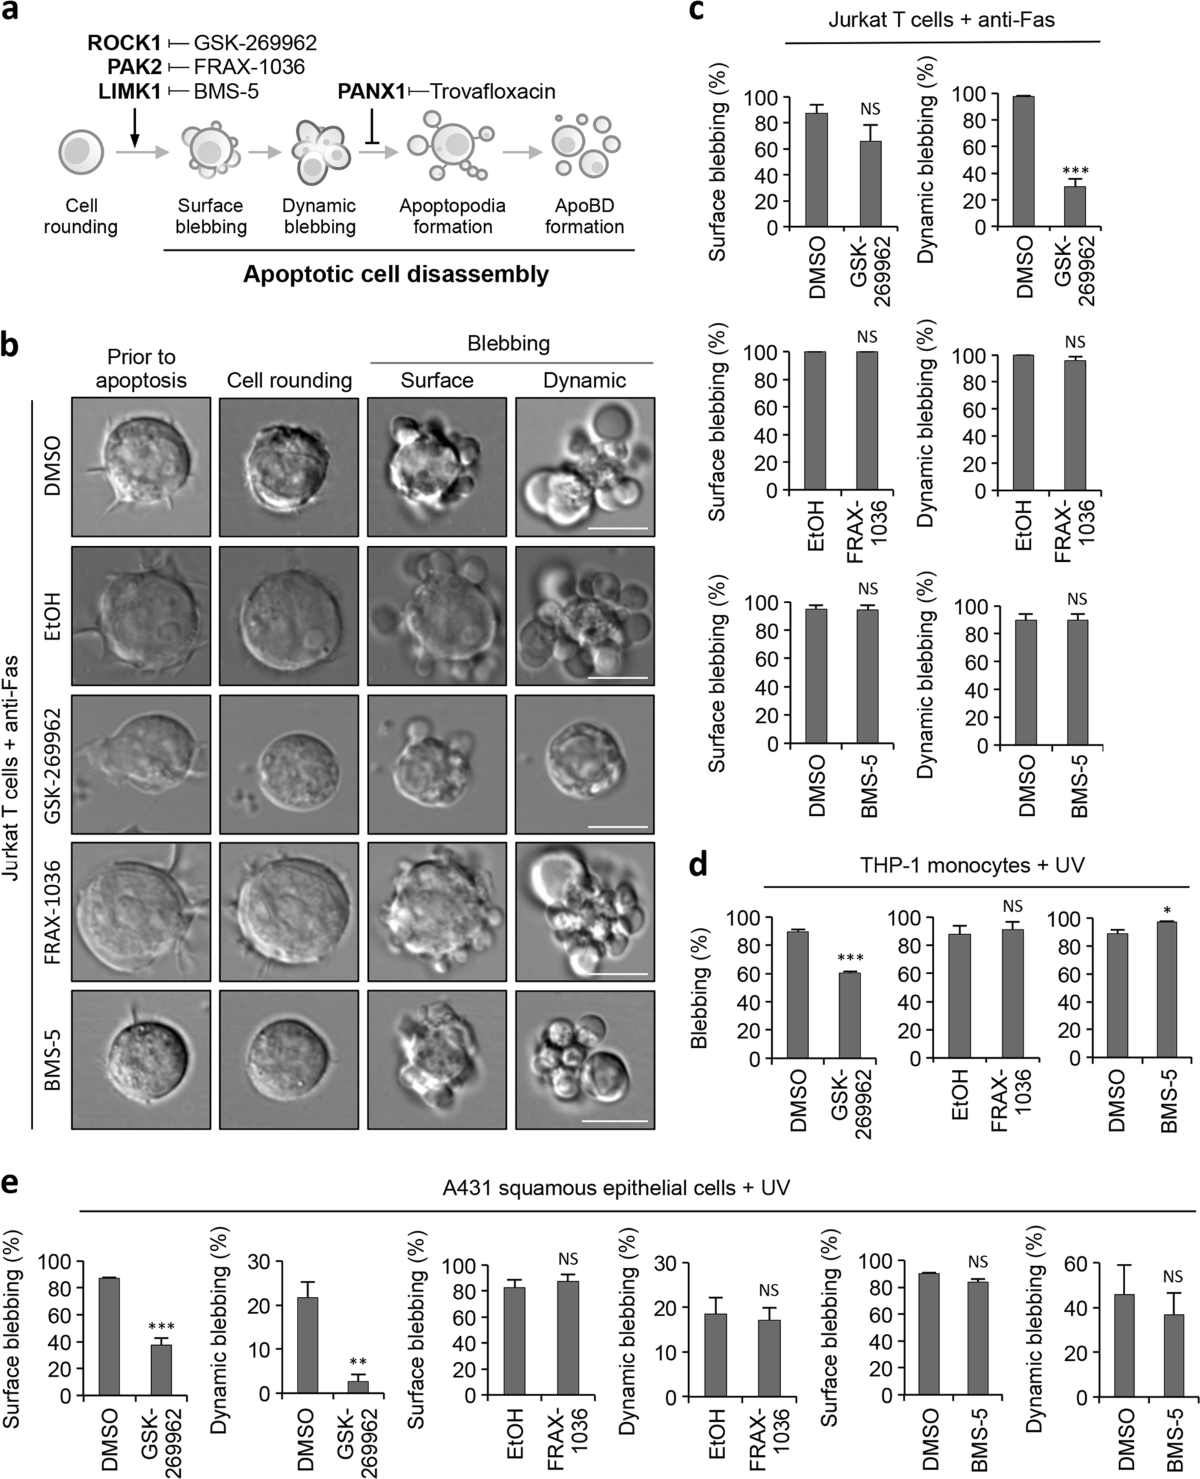 ROCK1 but not LIMK1 or PAK2 is a key regulator of apoptotic membrane  blebbing and cell disassembly